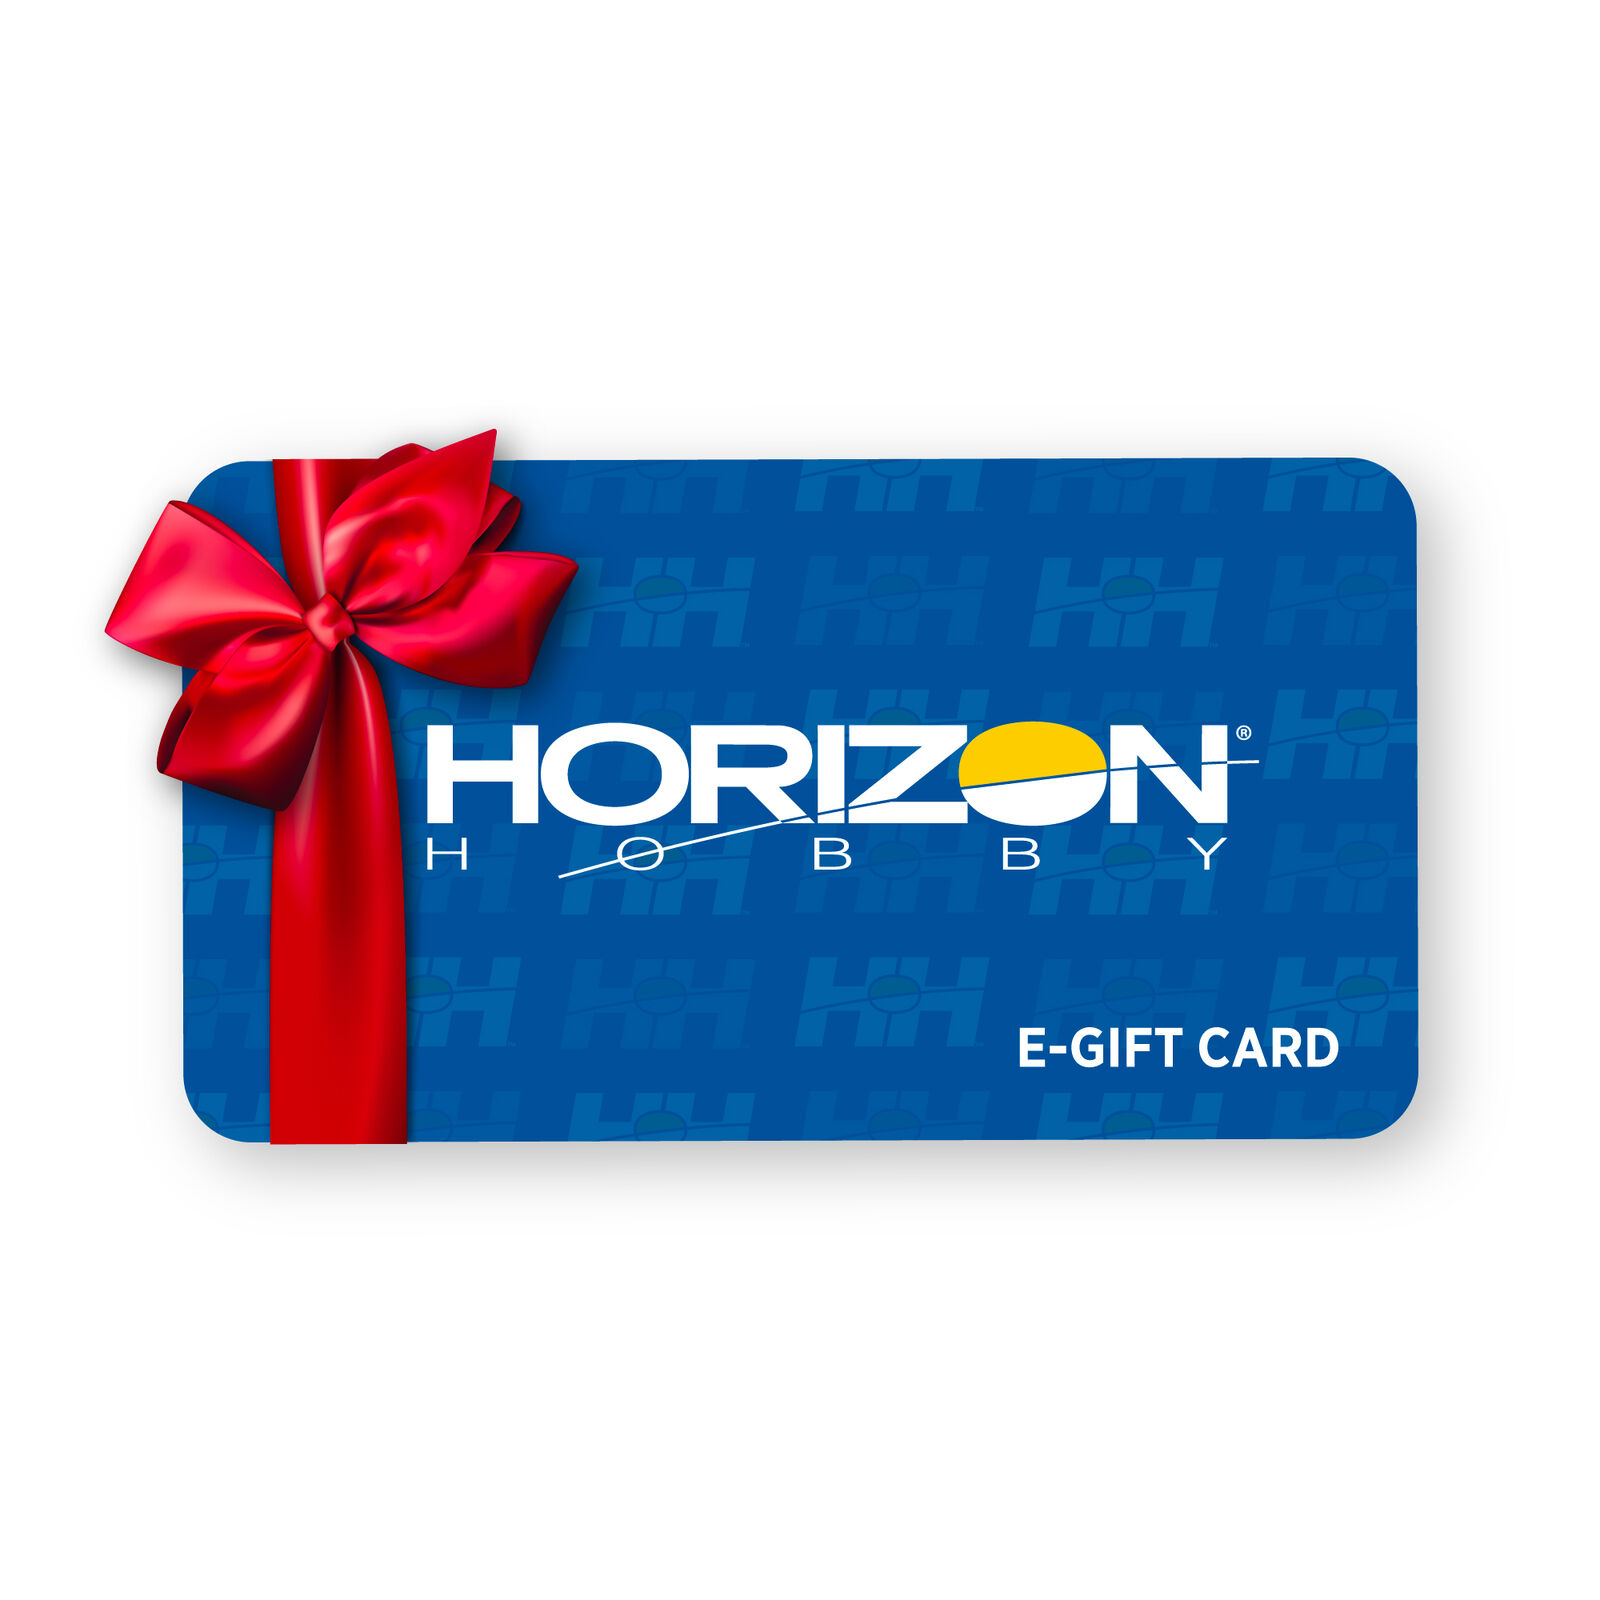 E-Gift Card $10 (emailed)